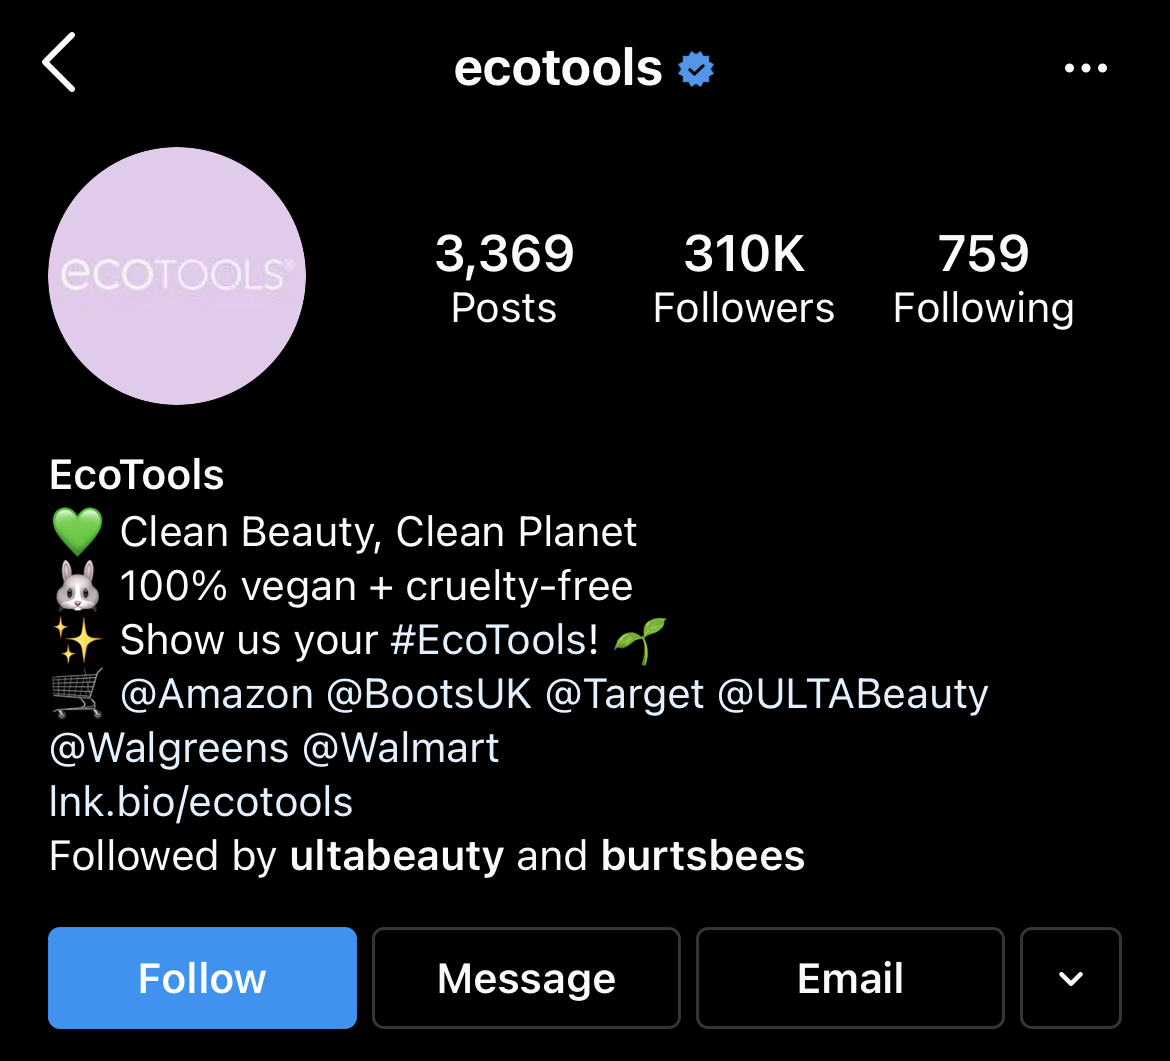 ecotools CTA in bio to use branded hashtag